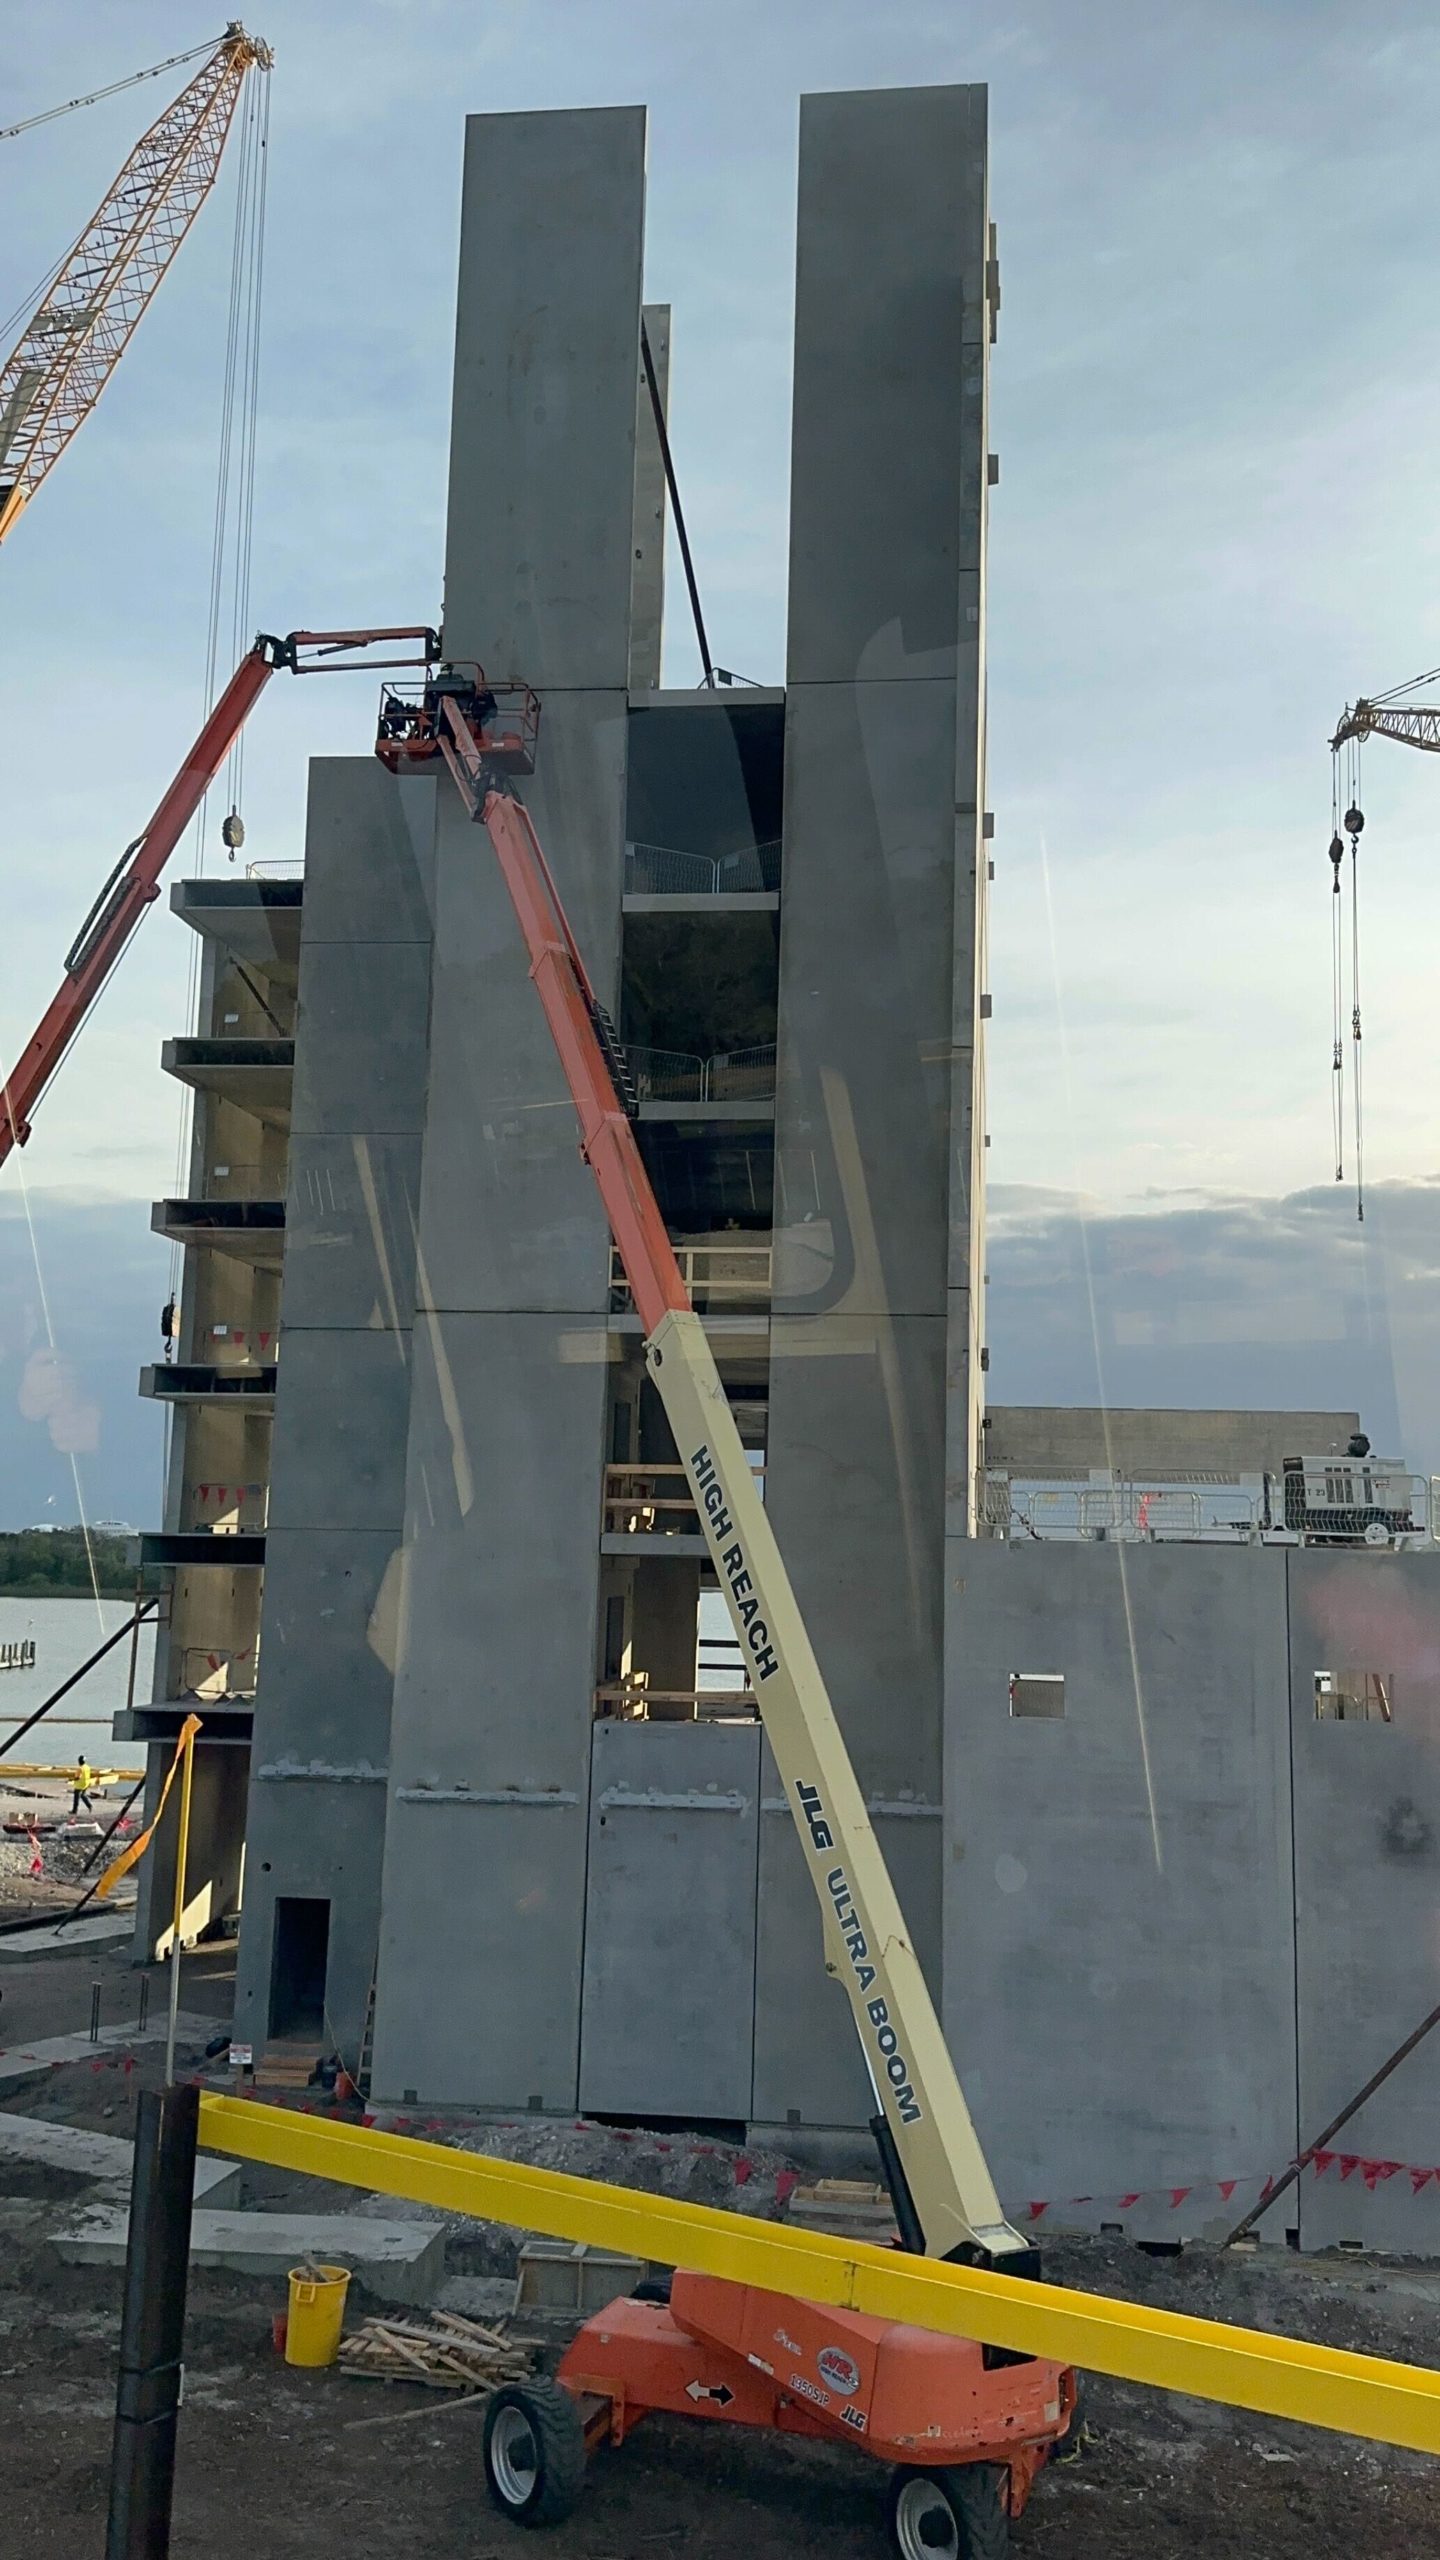 Construction Update: DVC Tower at the Poly Taking Shape - MickeyBlog.com